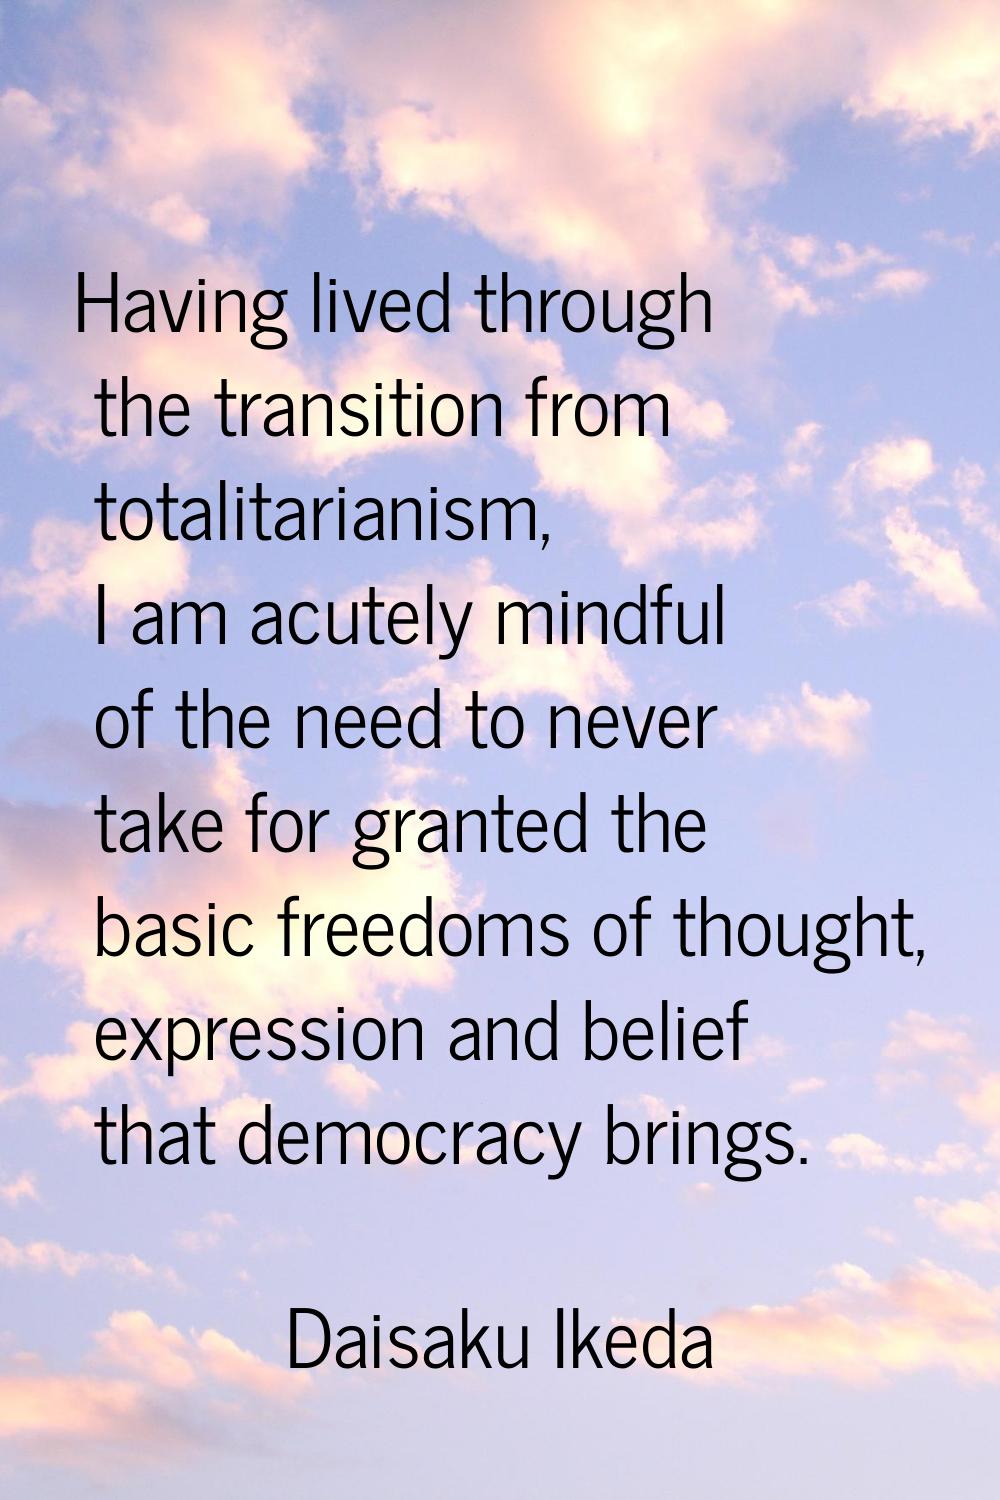 Having lived through the transition from totalitarianism, I am acutely mindful of the need to never